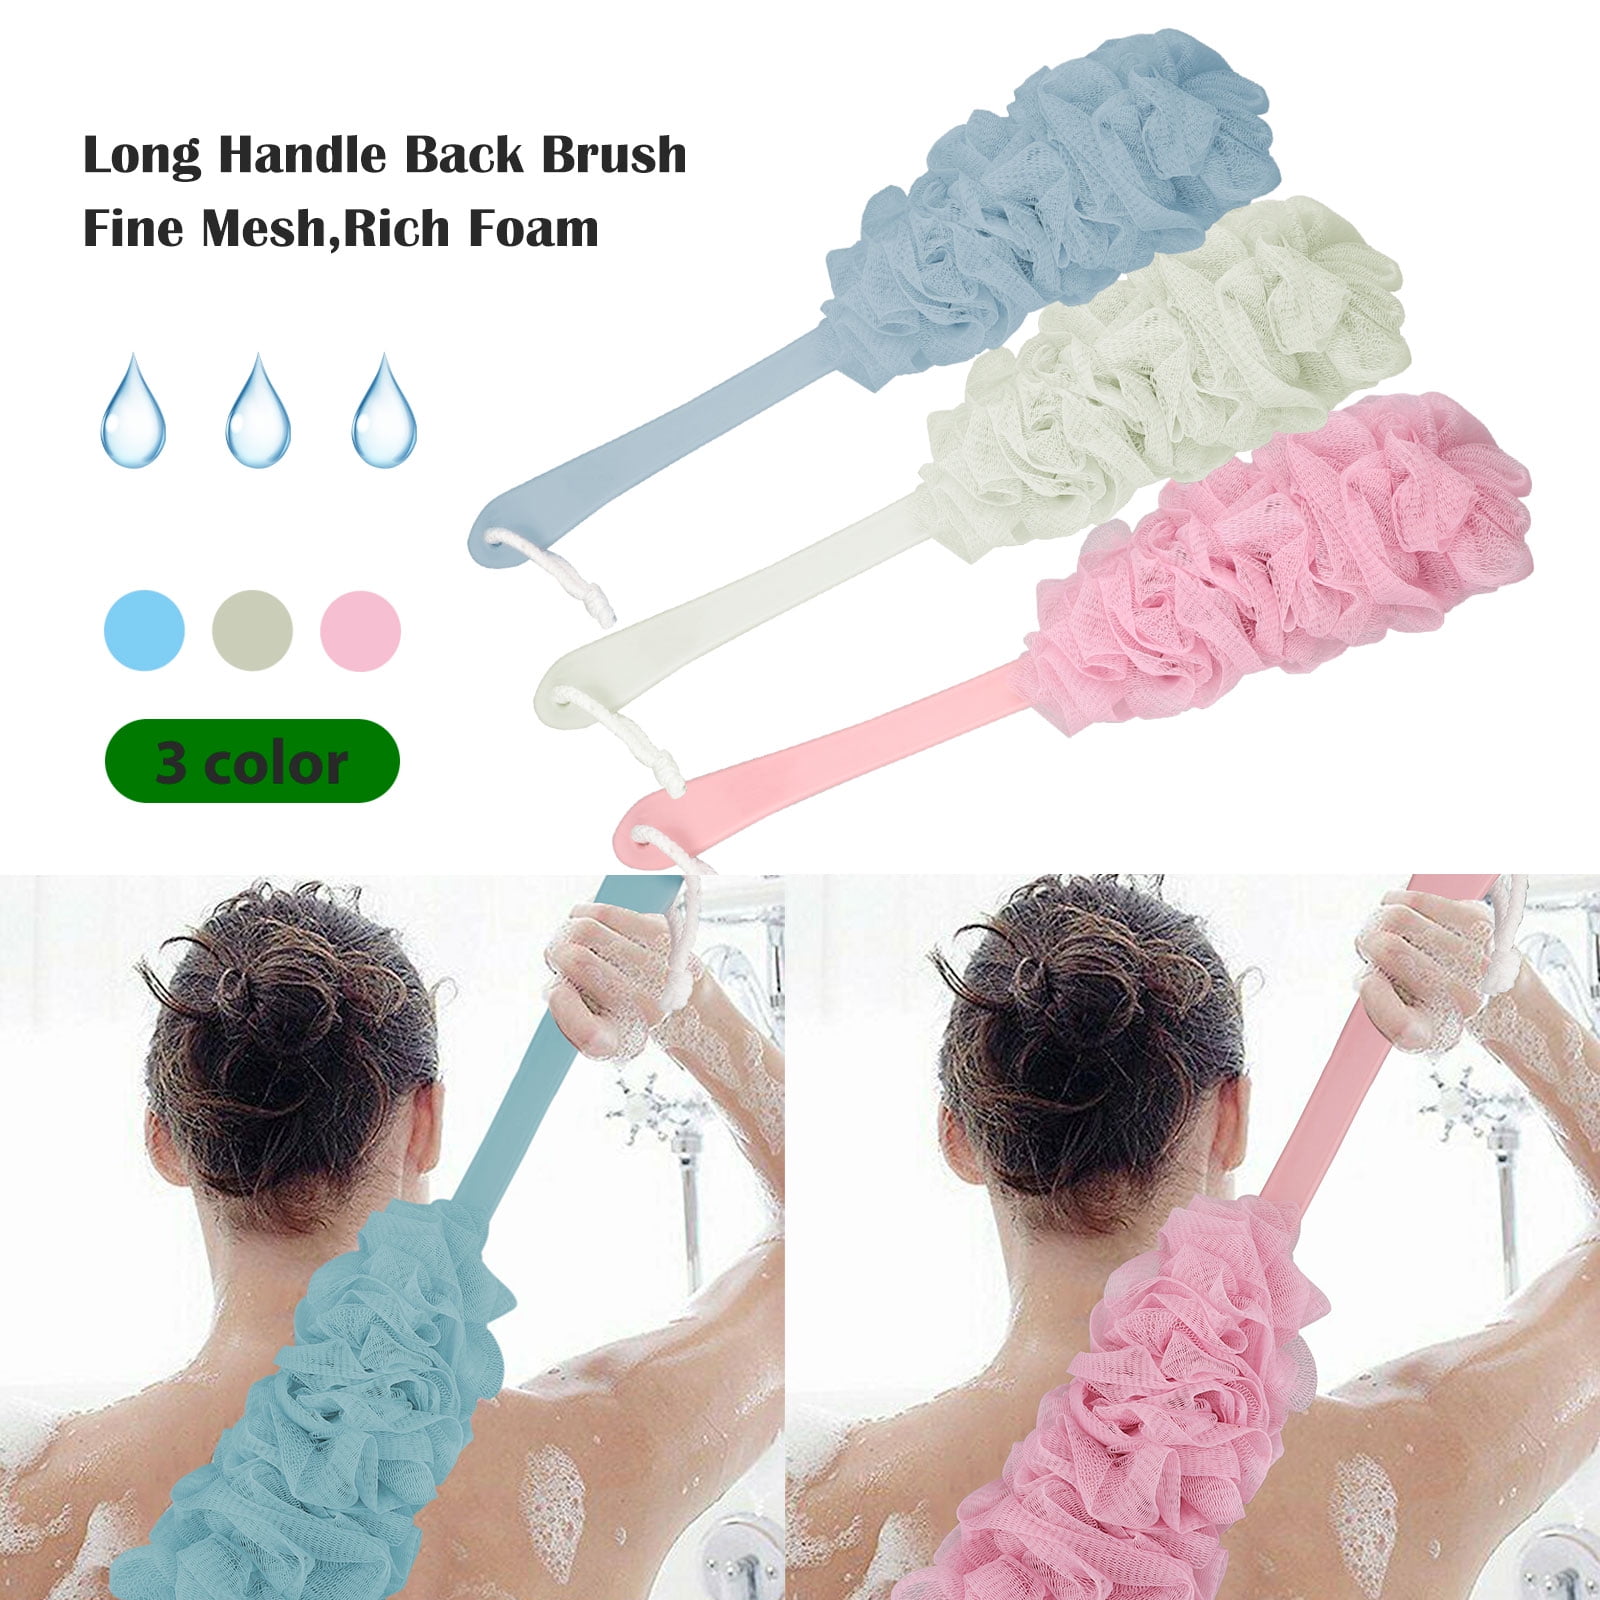 Delicate Bath Brushes Shower Products Comfortable Sponges Soft Towel Accessories 